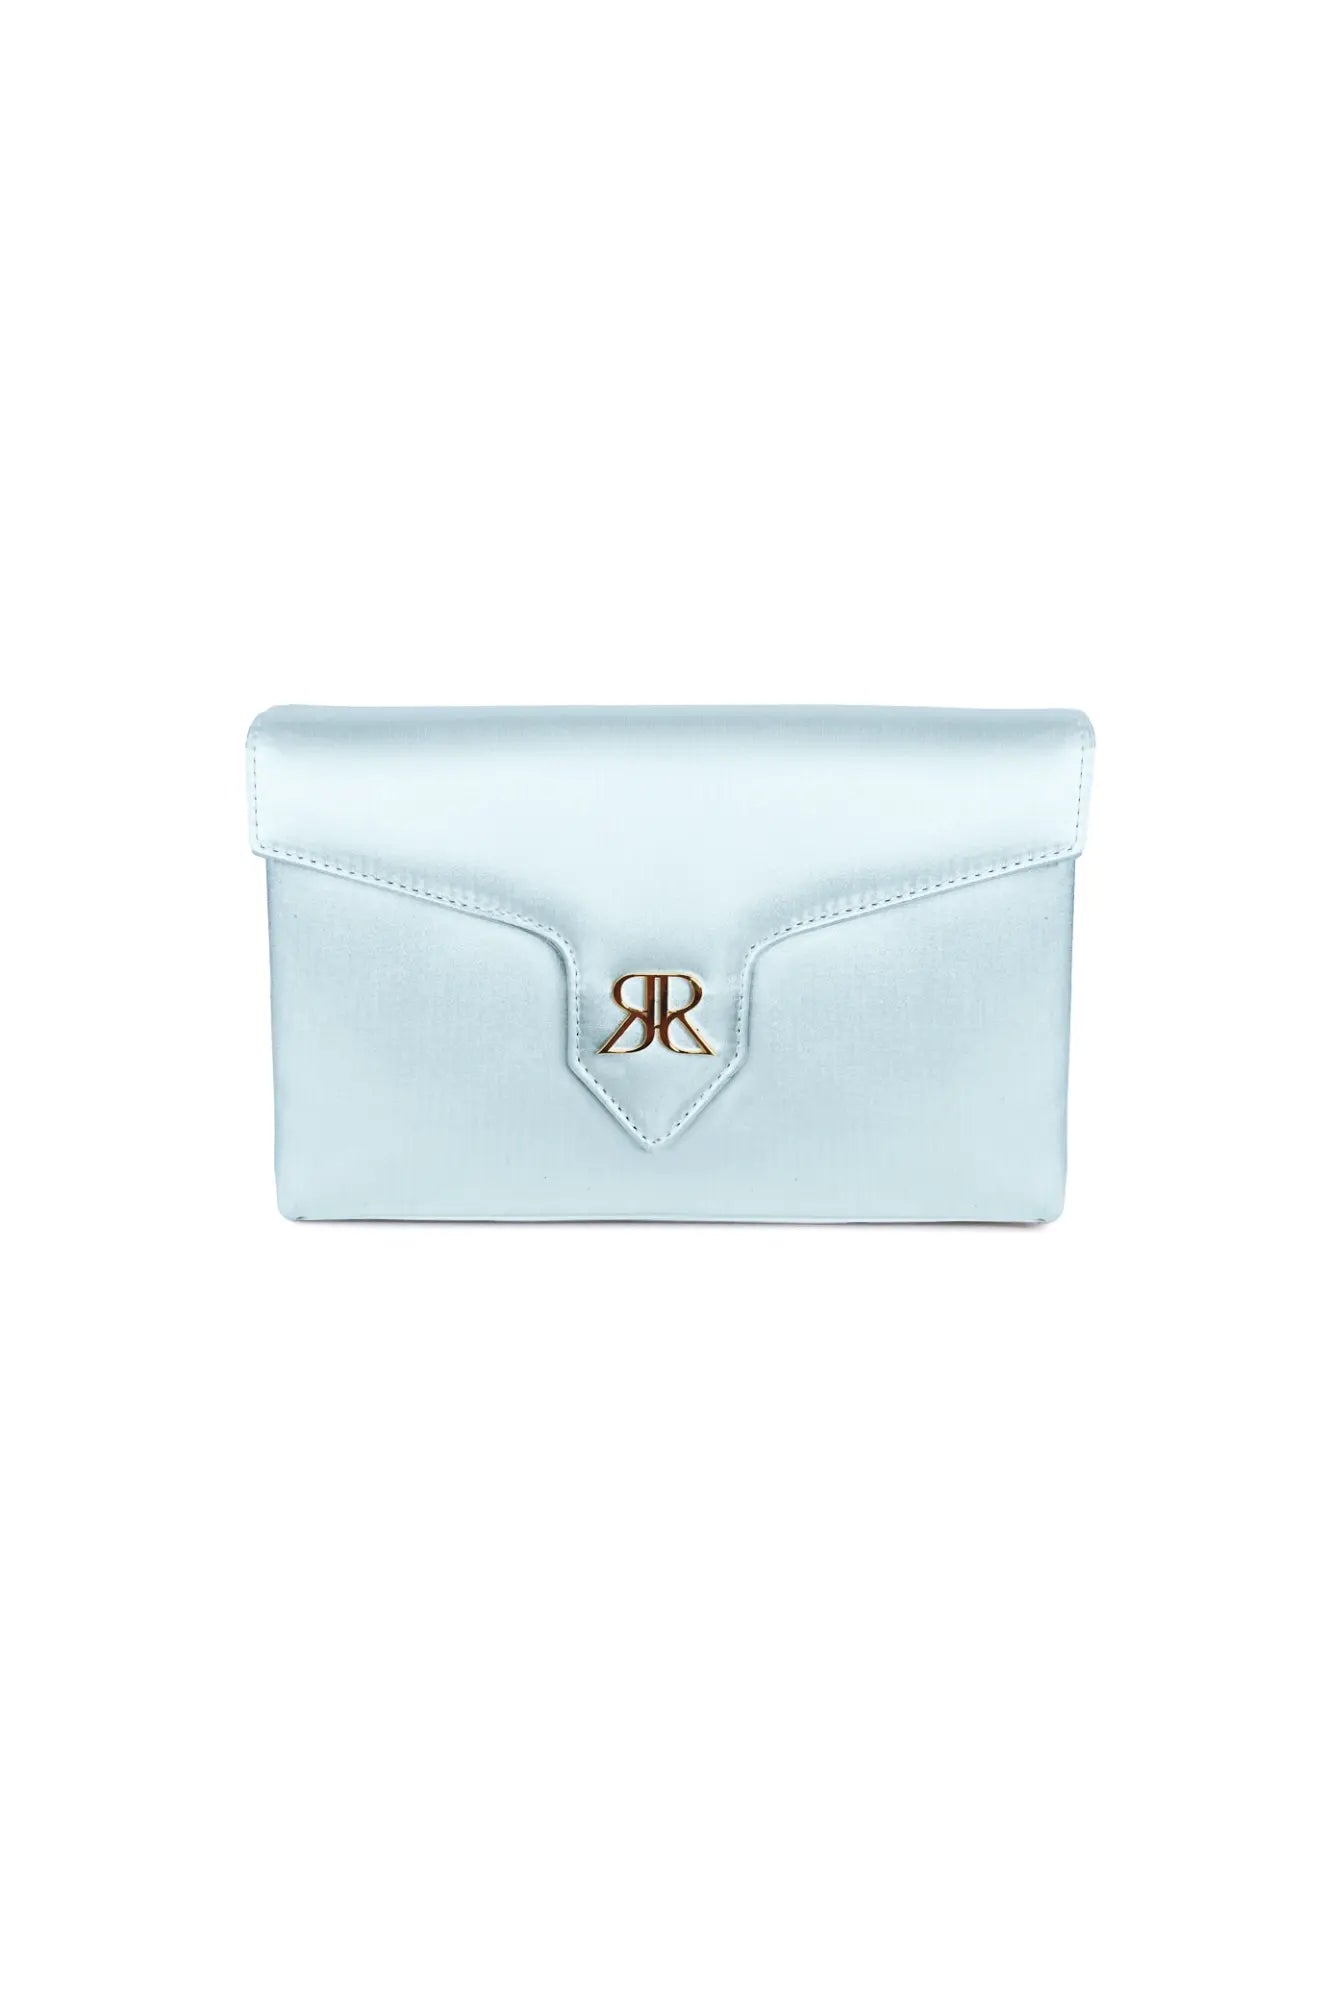 Love Note Envelope Clutch Cinderella Blue from The Bella Rosa Collection, with a metallic logo clasp on a white background, perfect for elegant evenings.